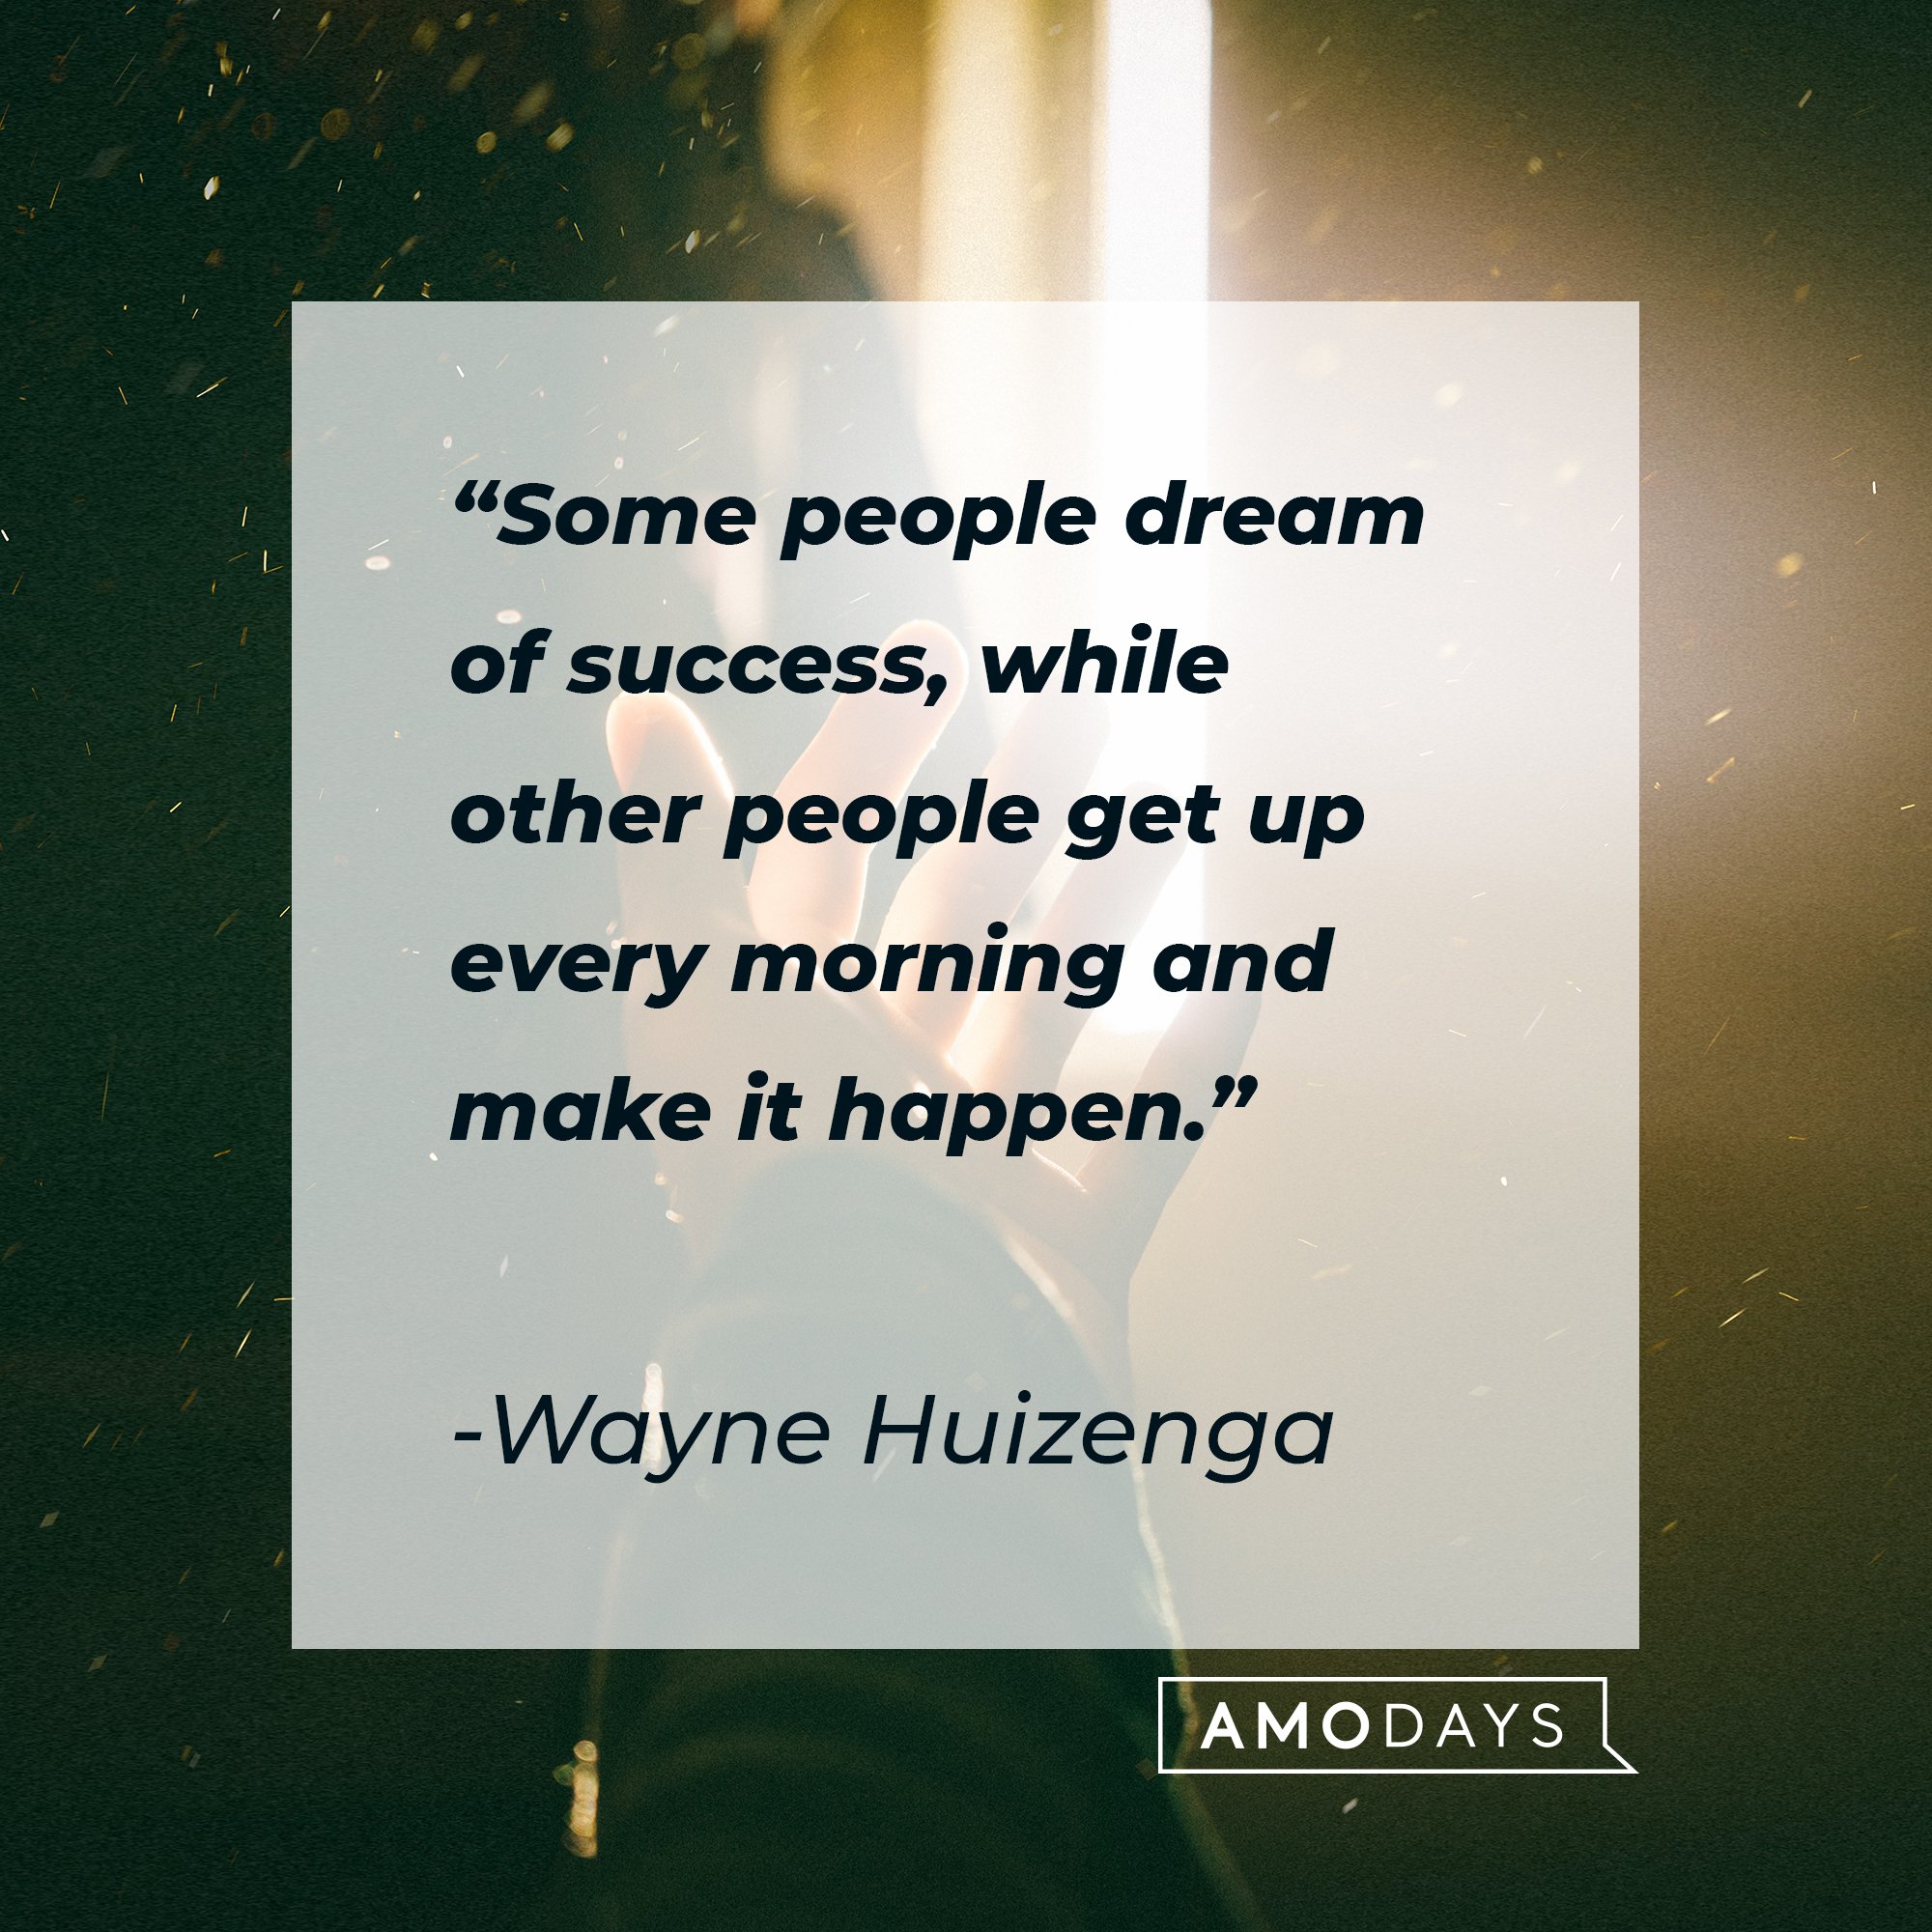 Wayne Huizenga's quote: "Some people dream of success, while other people get up every morning and make it happen."  | Image: AmoDays 